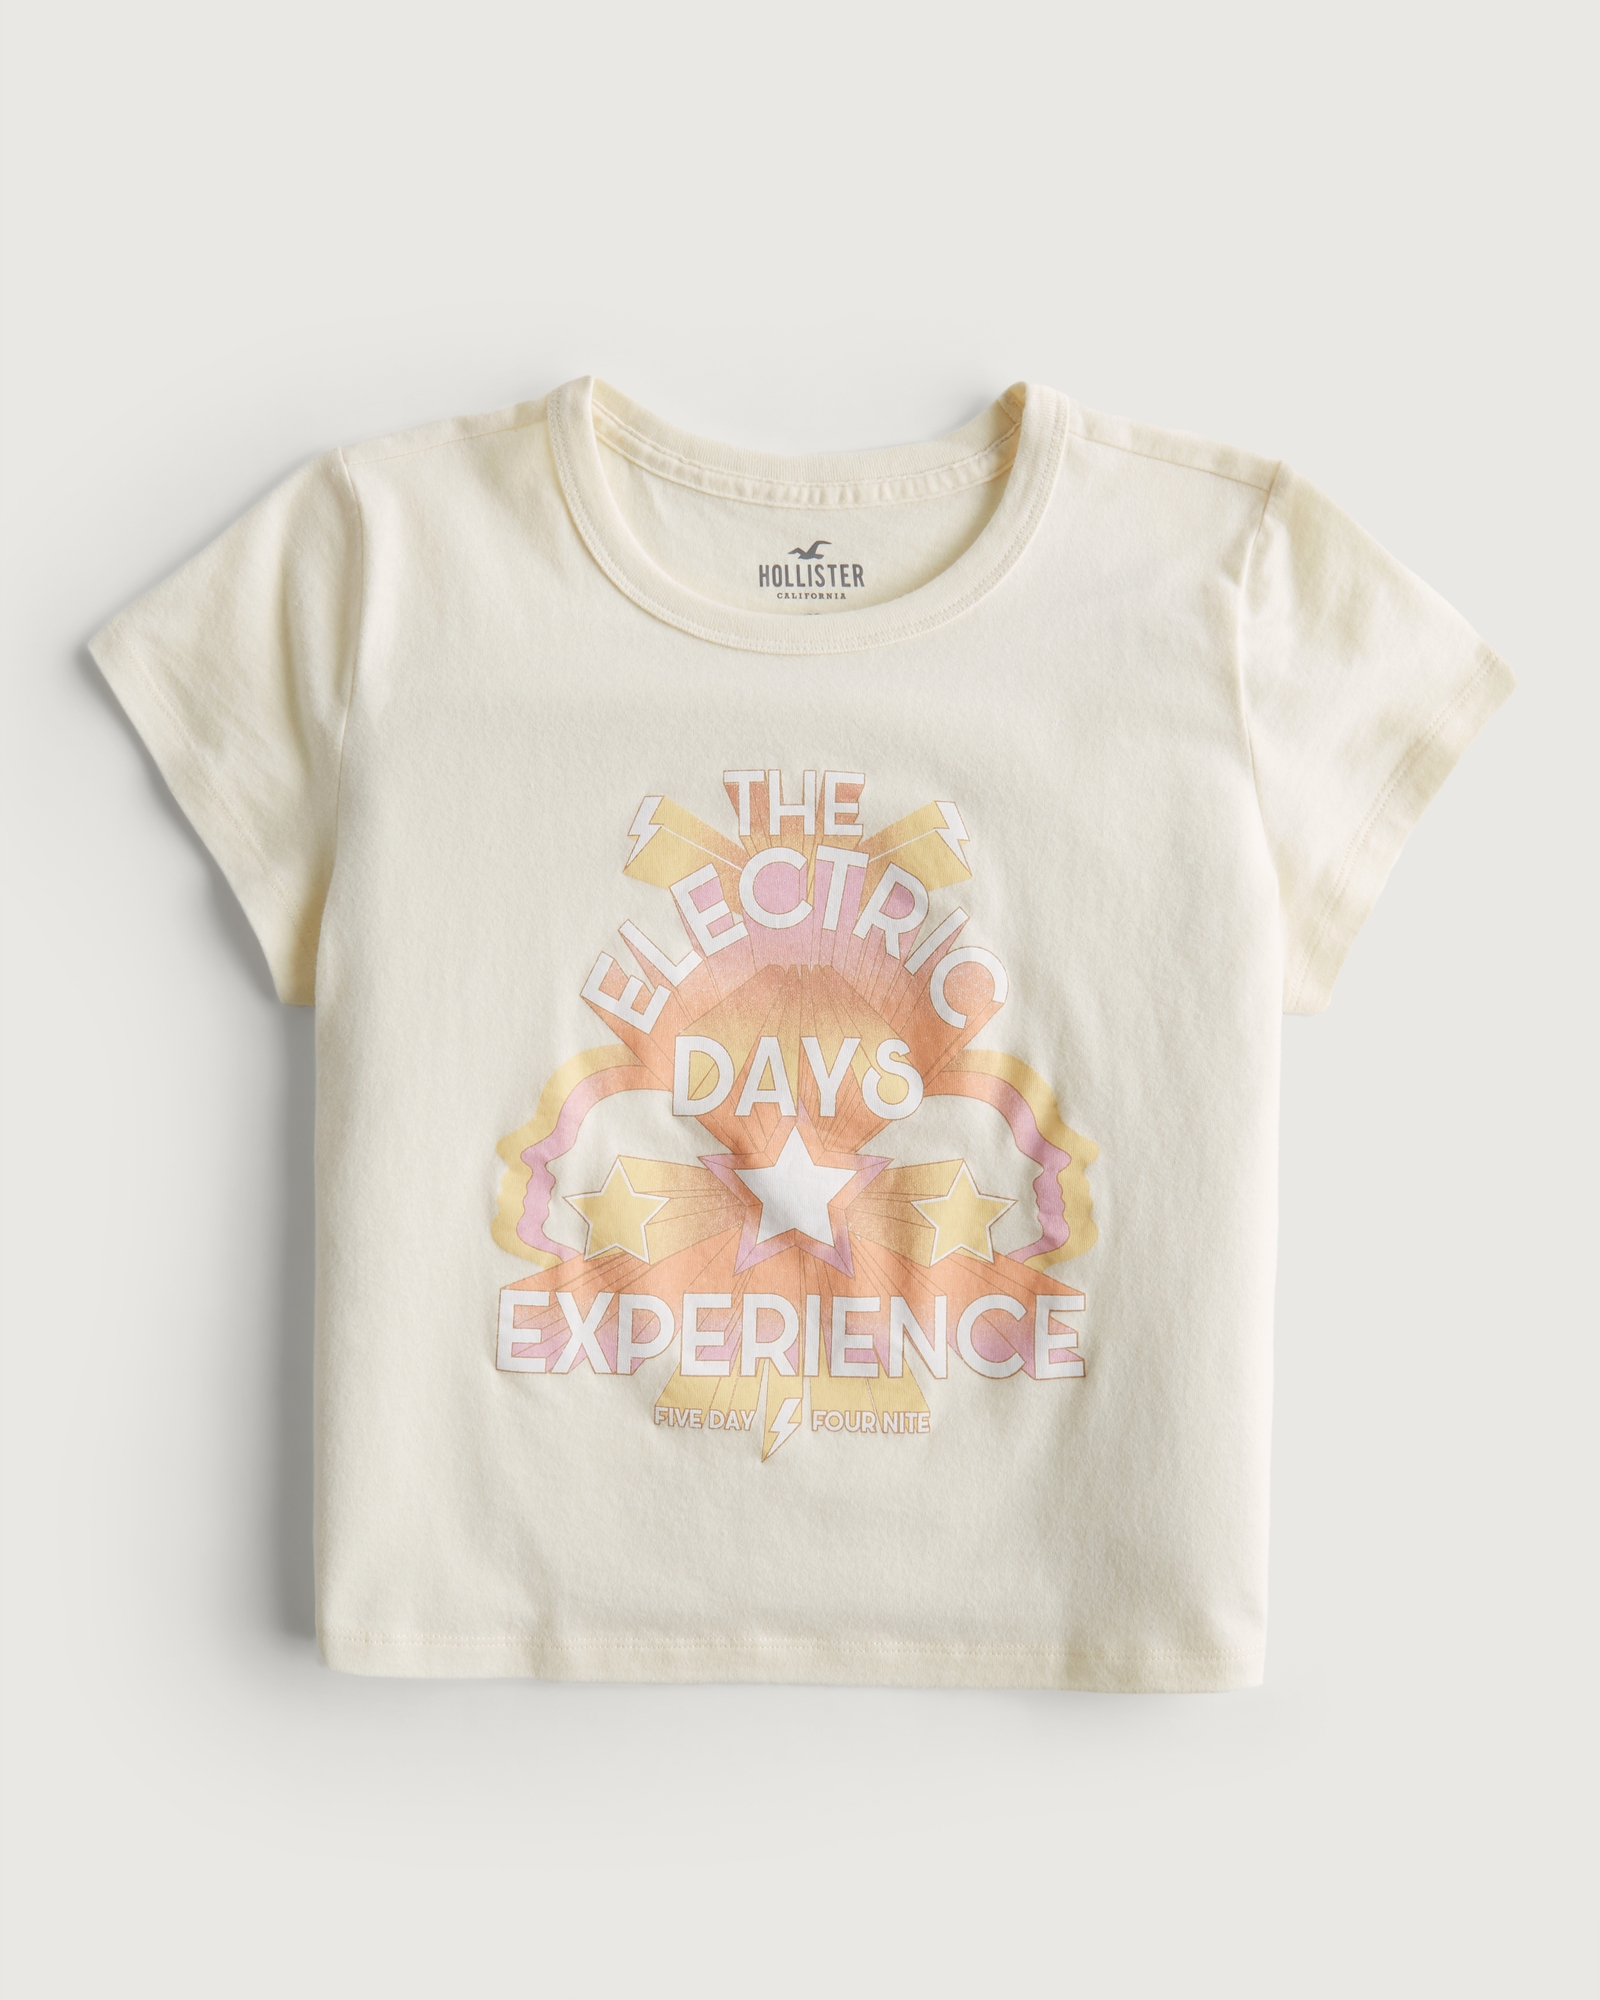 Women's Relaxed Vintage Graphic Baby Tee, Women's Clearance